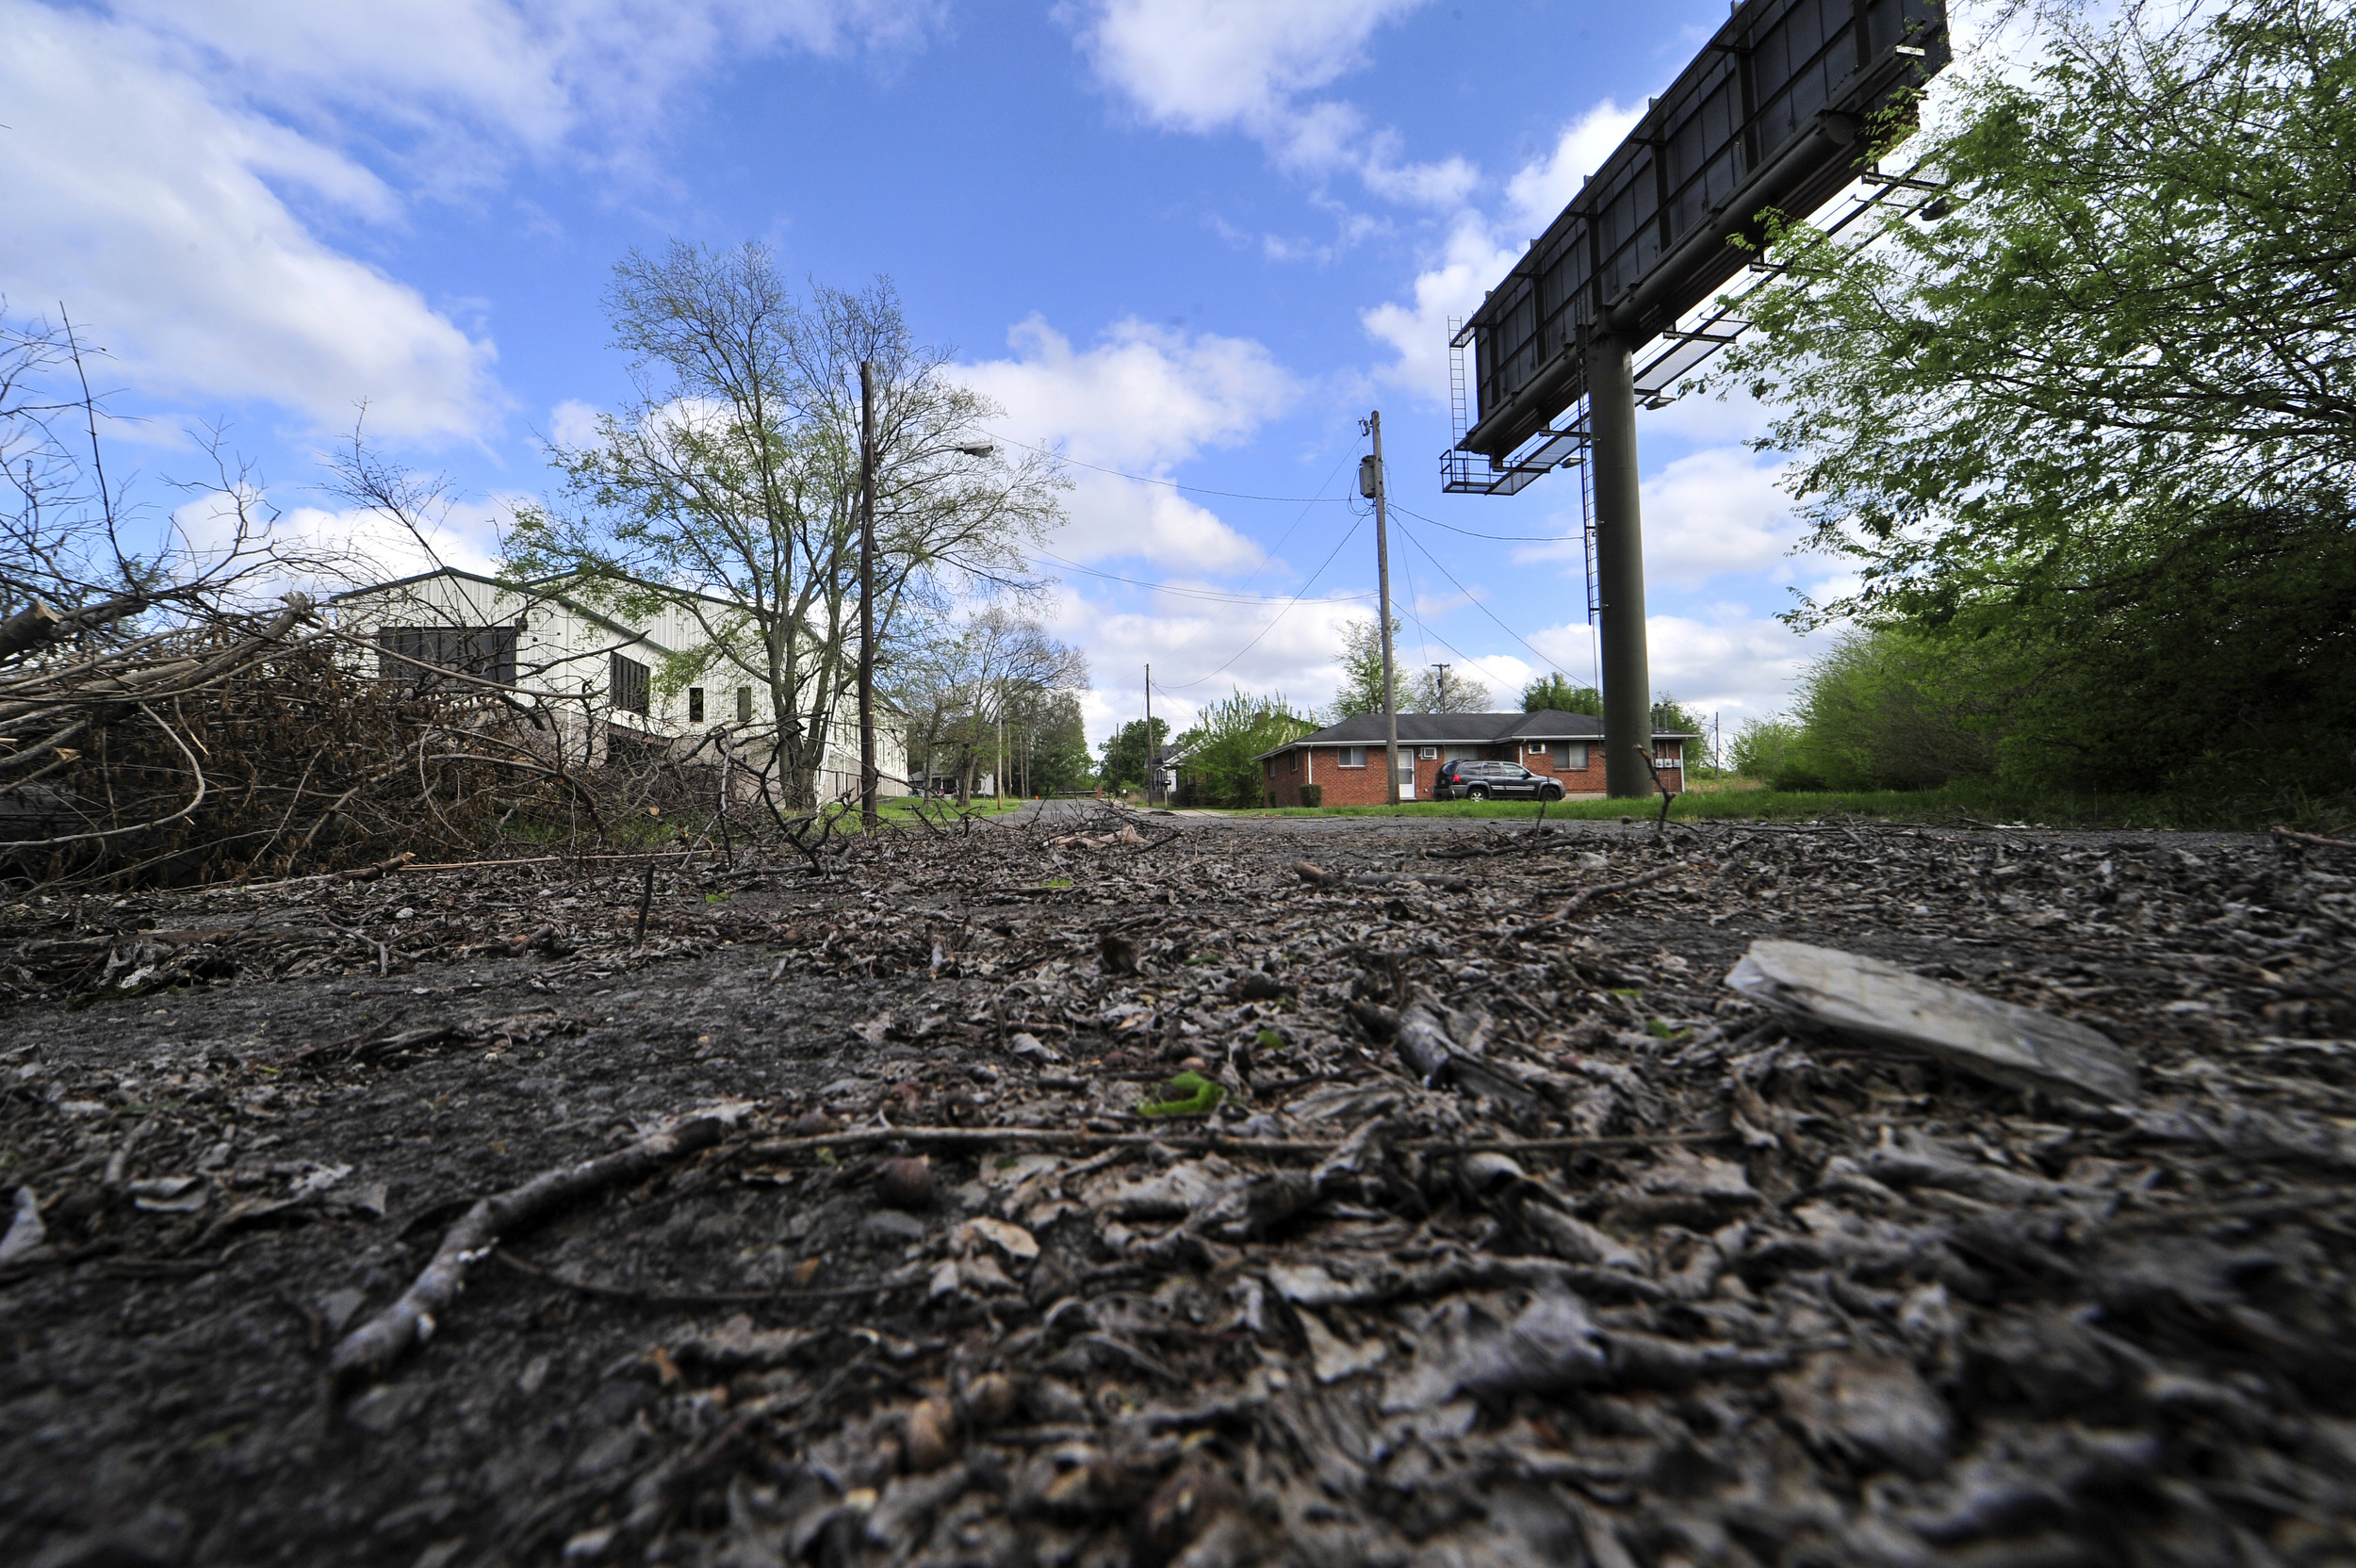  LeRyan Nicholson's body was found burned and wrapped in a carpet in the morning hours of April 13, 1998 on this dead-end of Mary Street in North Nashville. Nicholson was reported missing on April 12, 1998 at the age of 18. He was buried as a John Do